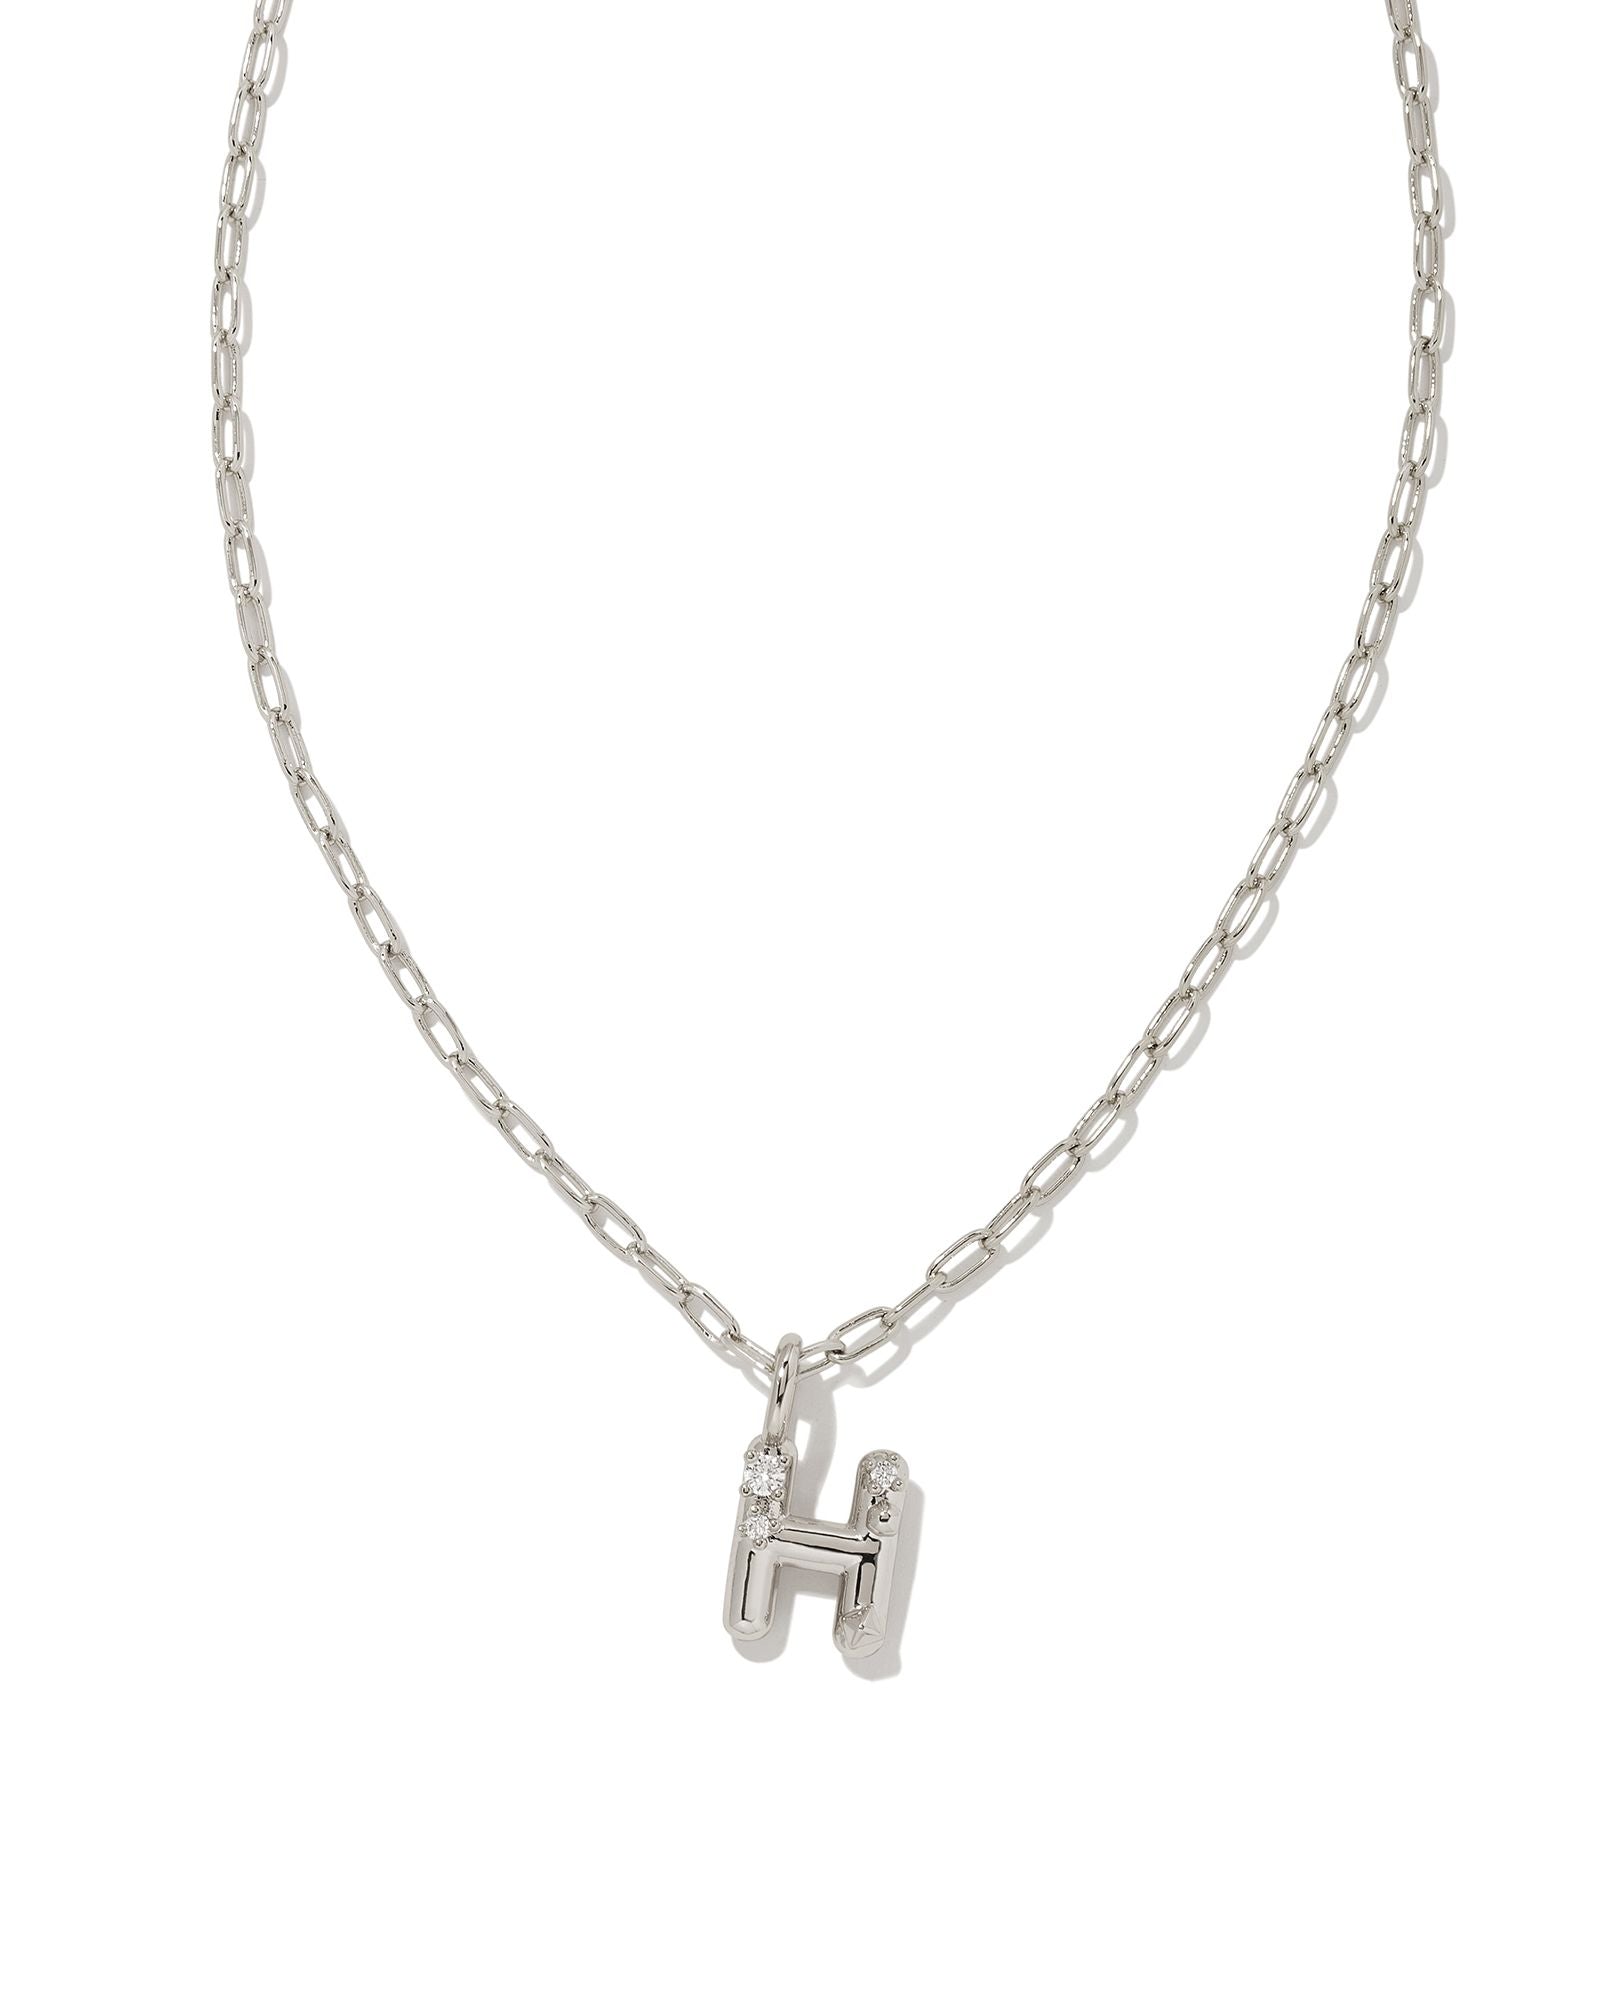 Crystal Letter Silver Short Pendant Necklace in White Crystal - Brazos Avenue Market 